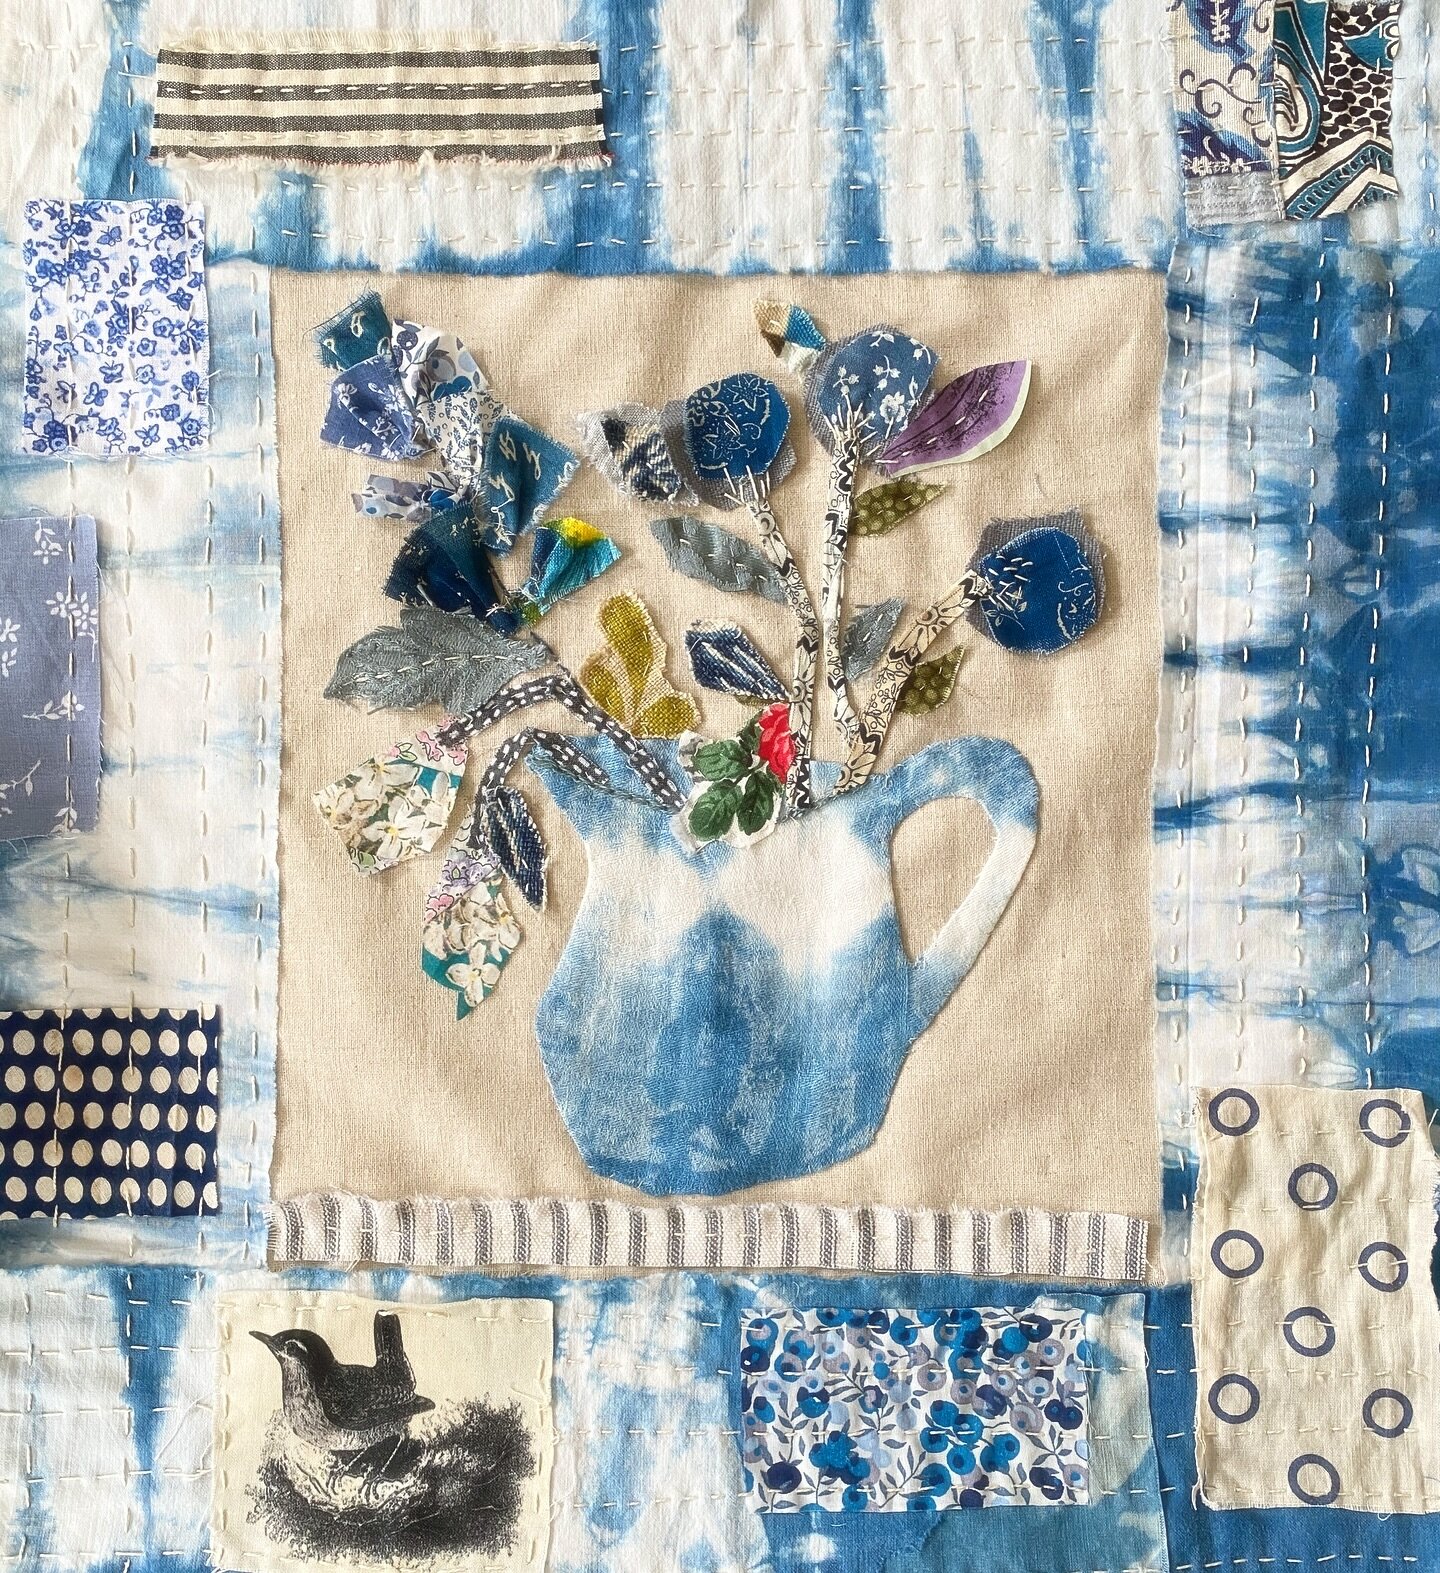 a variation on #myindigokitchen for a workshop this spring. love the way the indigo highlighted the damask pattern in the pitcher. #charlottelyonsstitching #textilecollage #indigo #slowstitching 🪡🧵